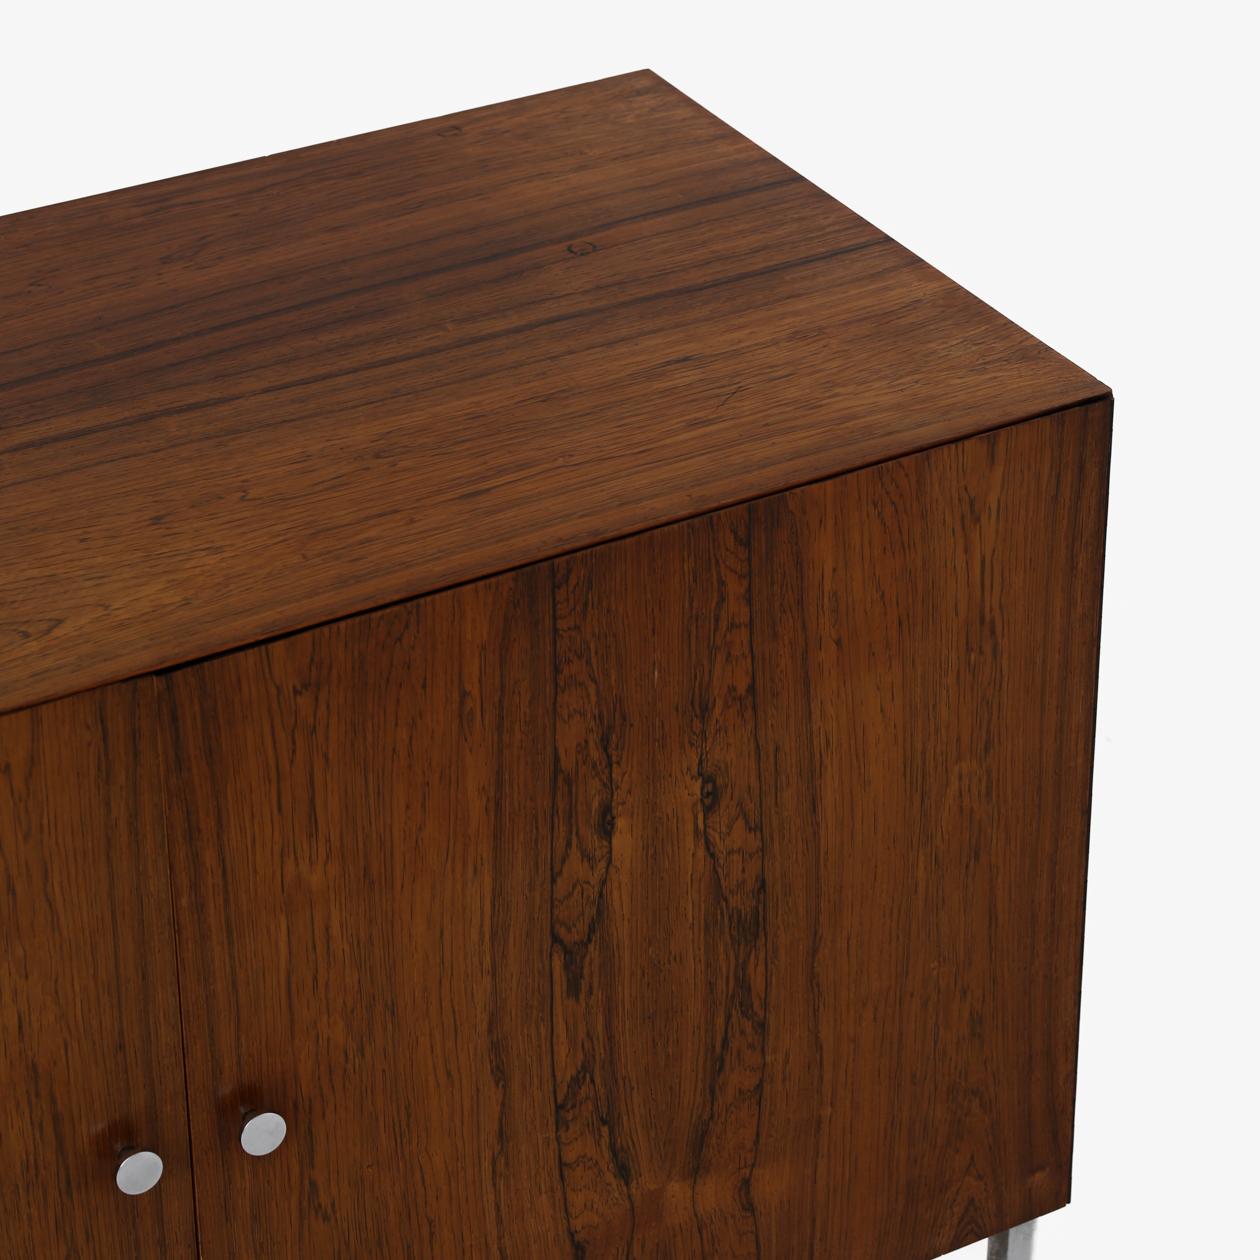 20th Century Sideboard in Rosewood by Poul Nørreklit